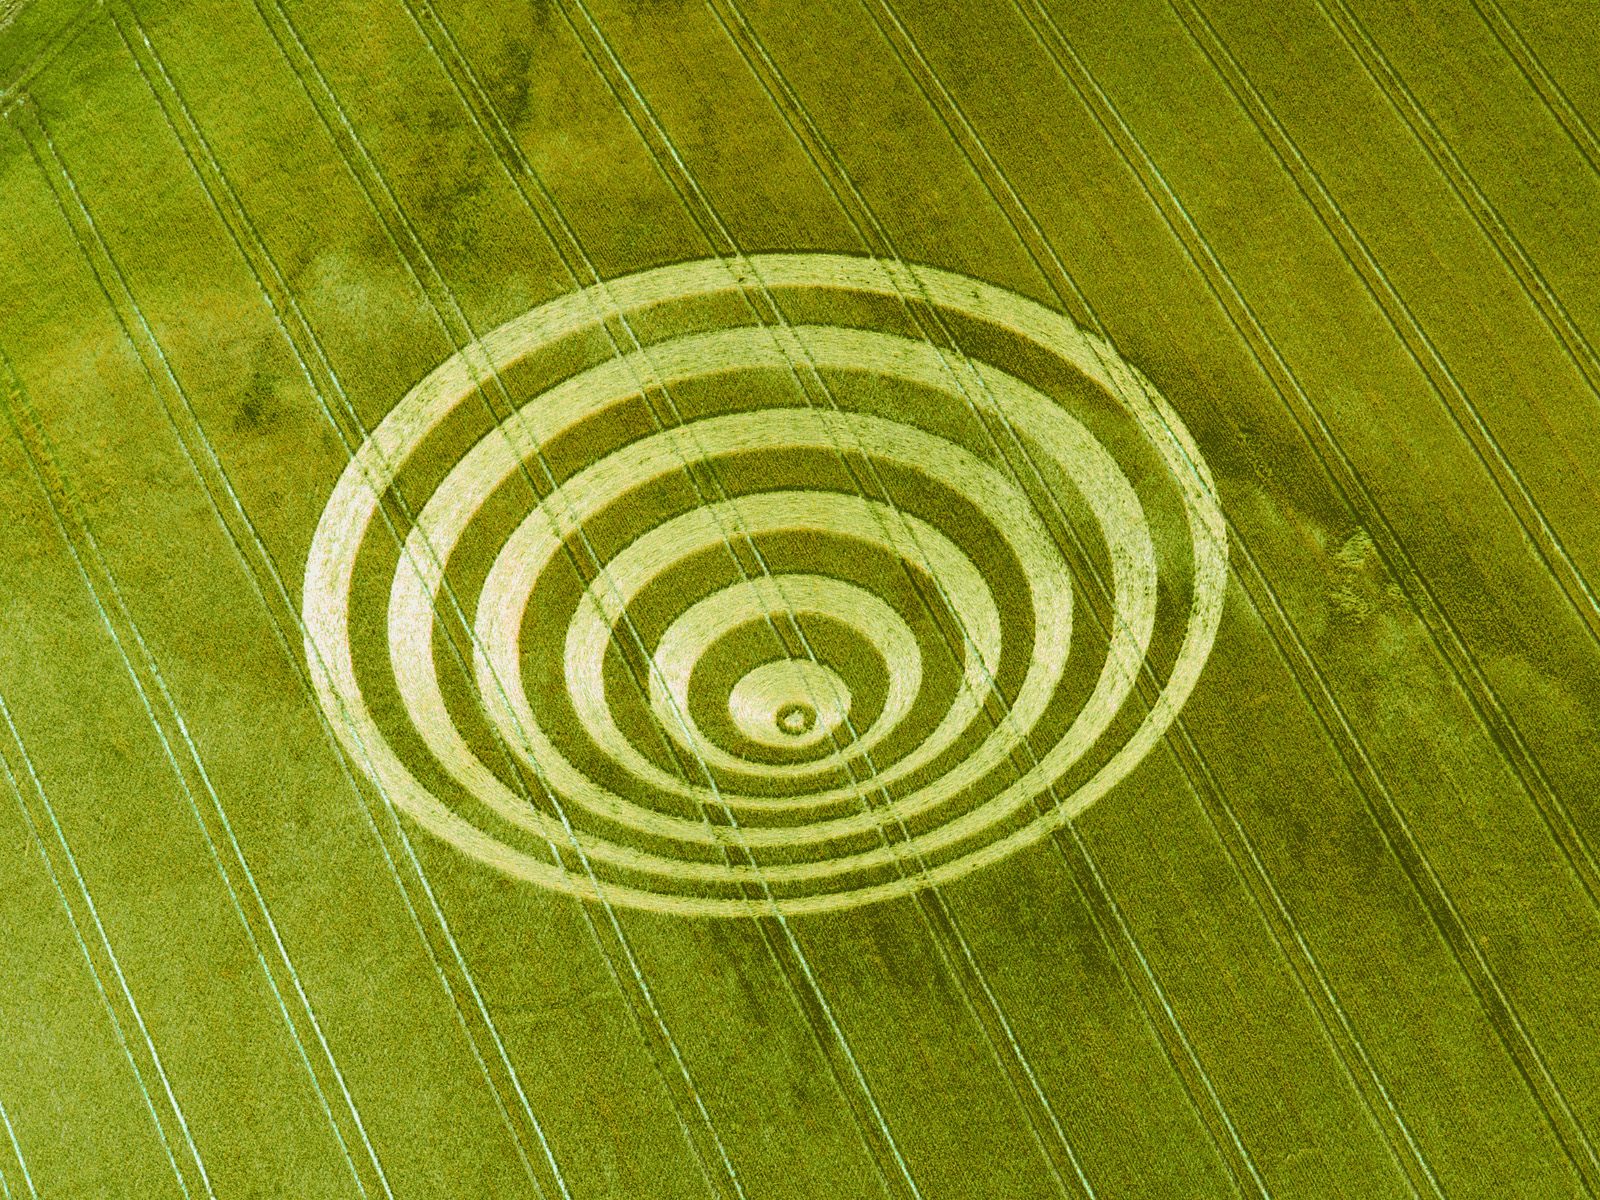 Crop Circles Free Desktop Wallpapers for HD Widescreen and Mobile